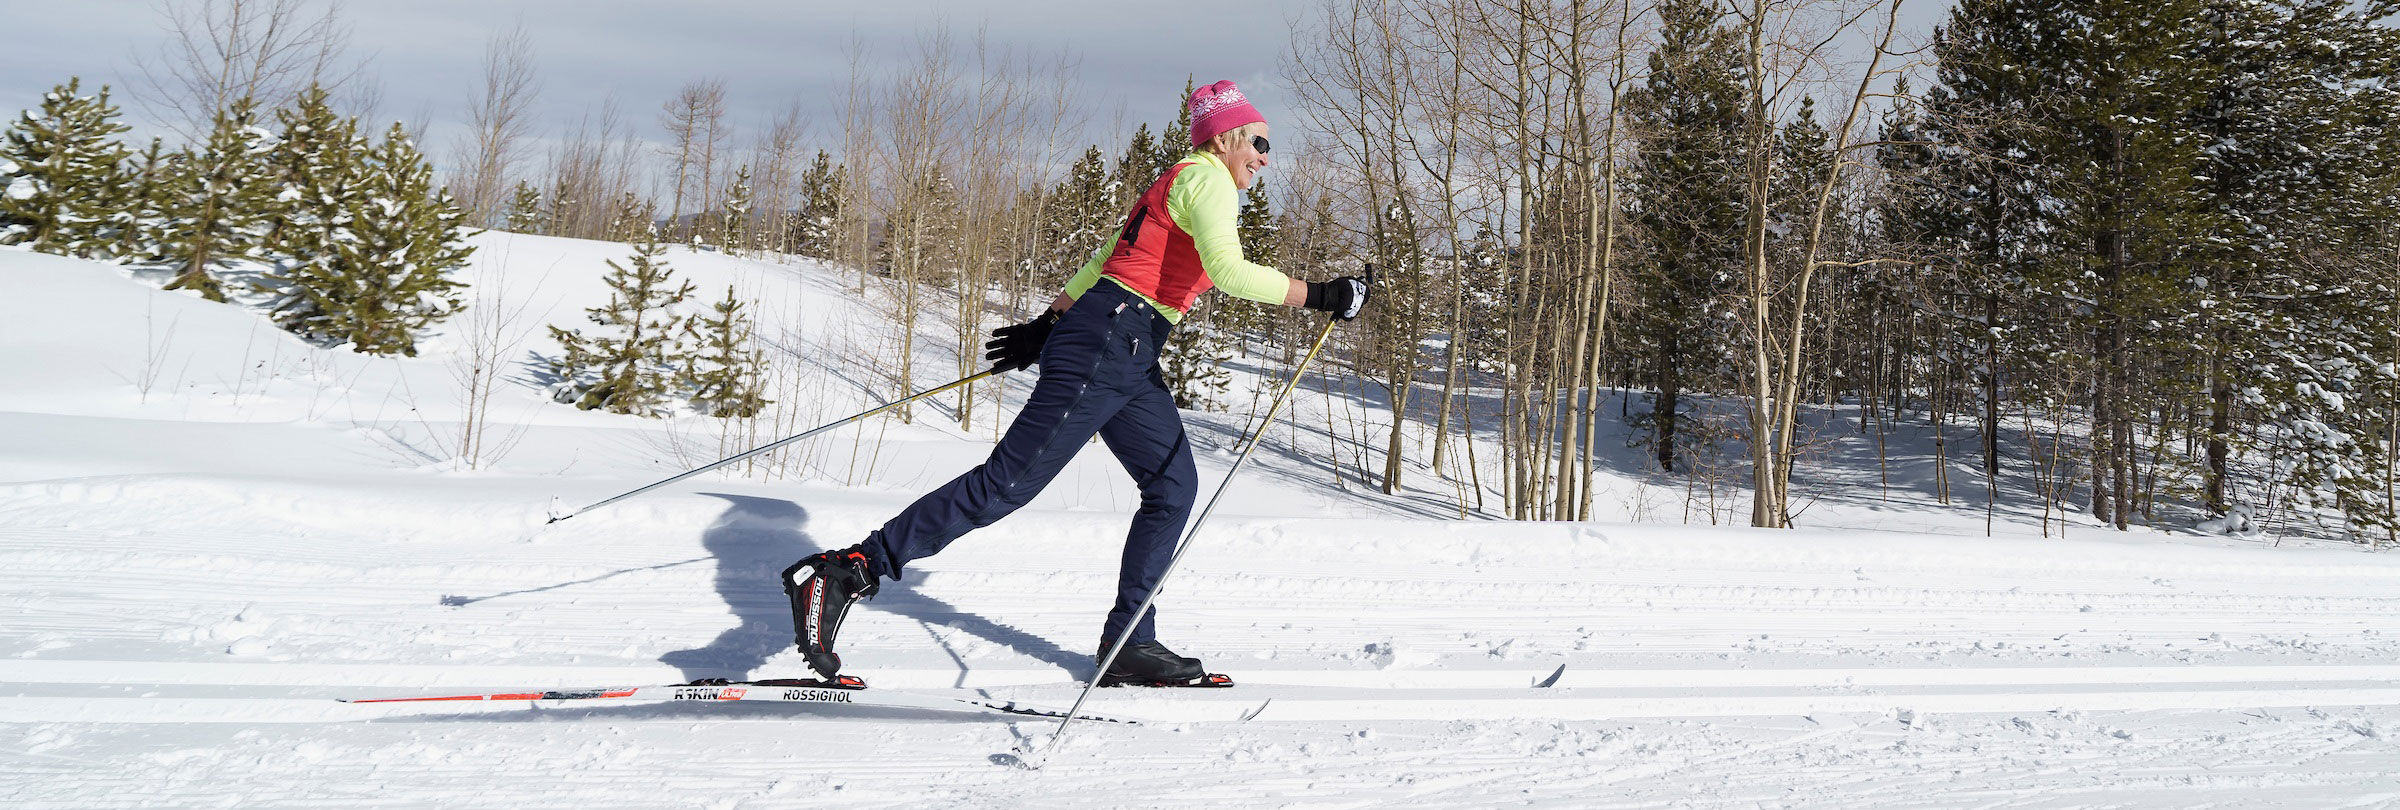 Woman Nordic skiing on groomed track.